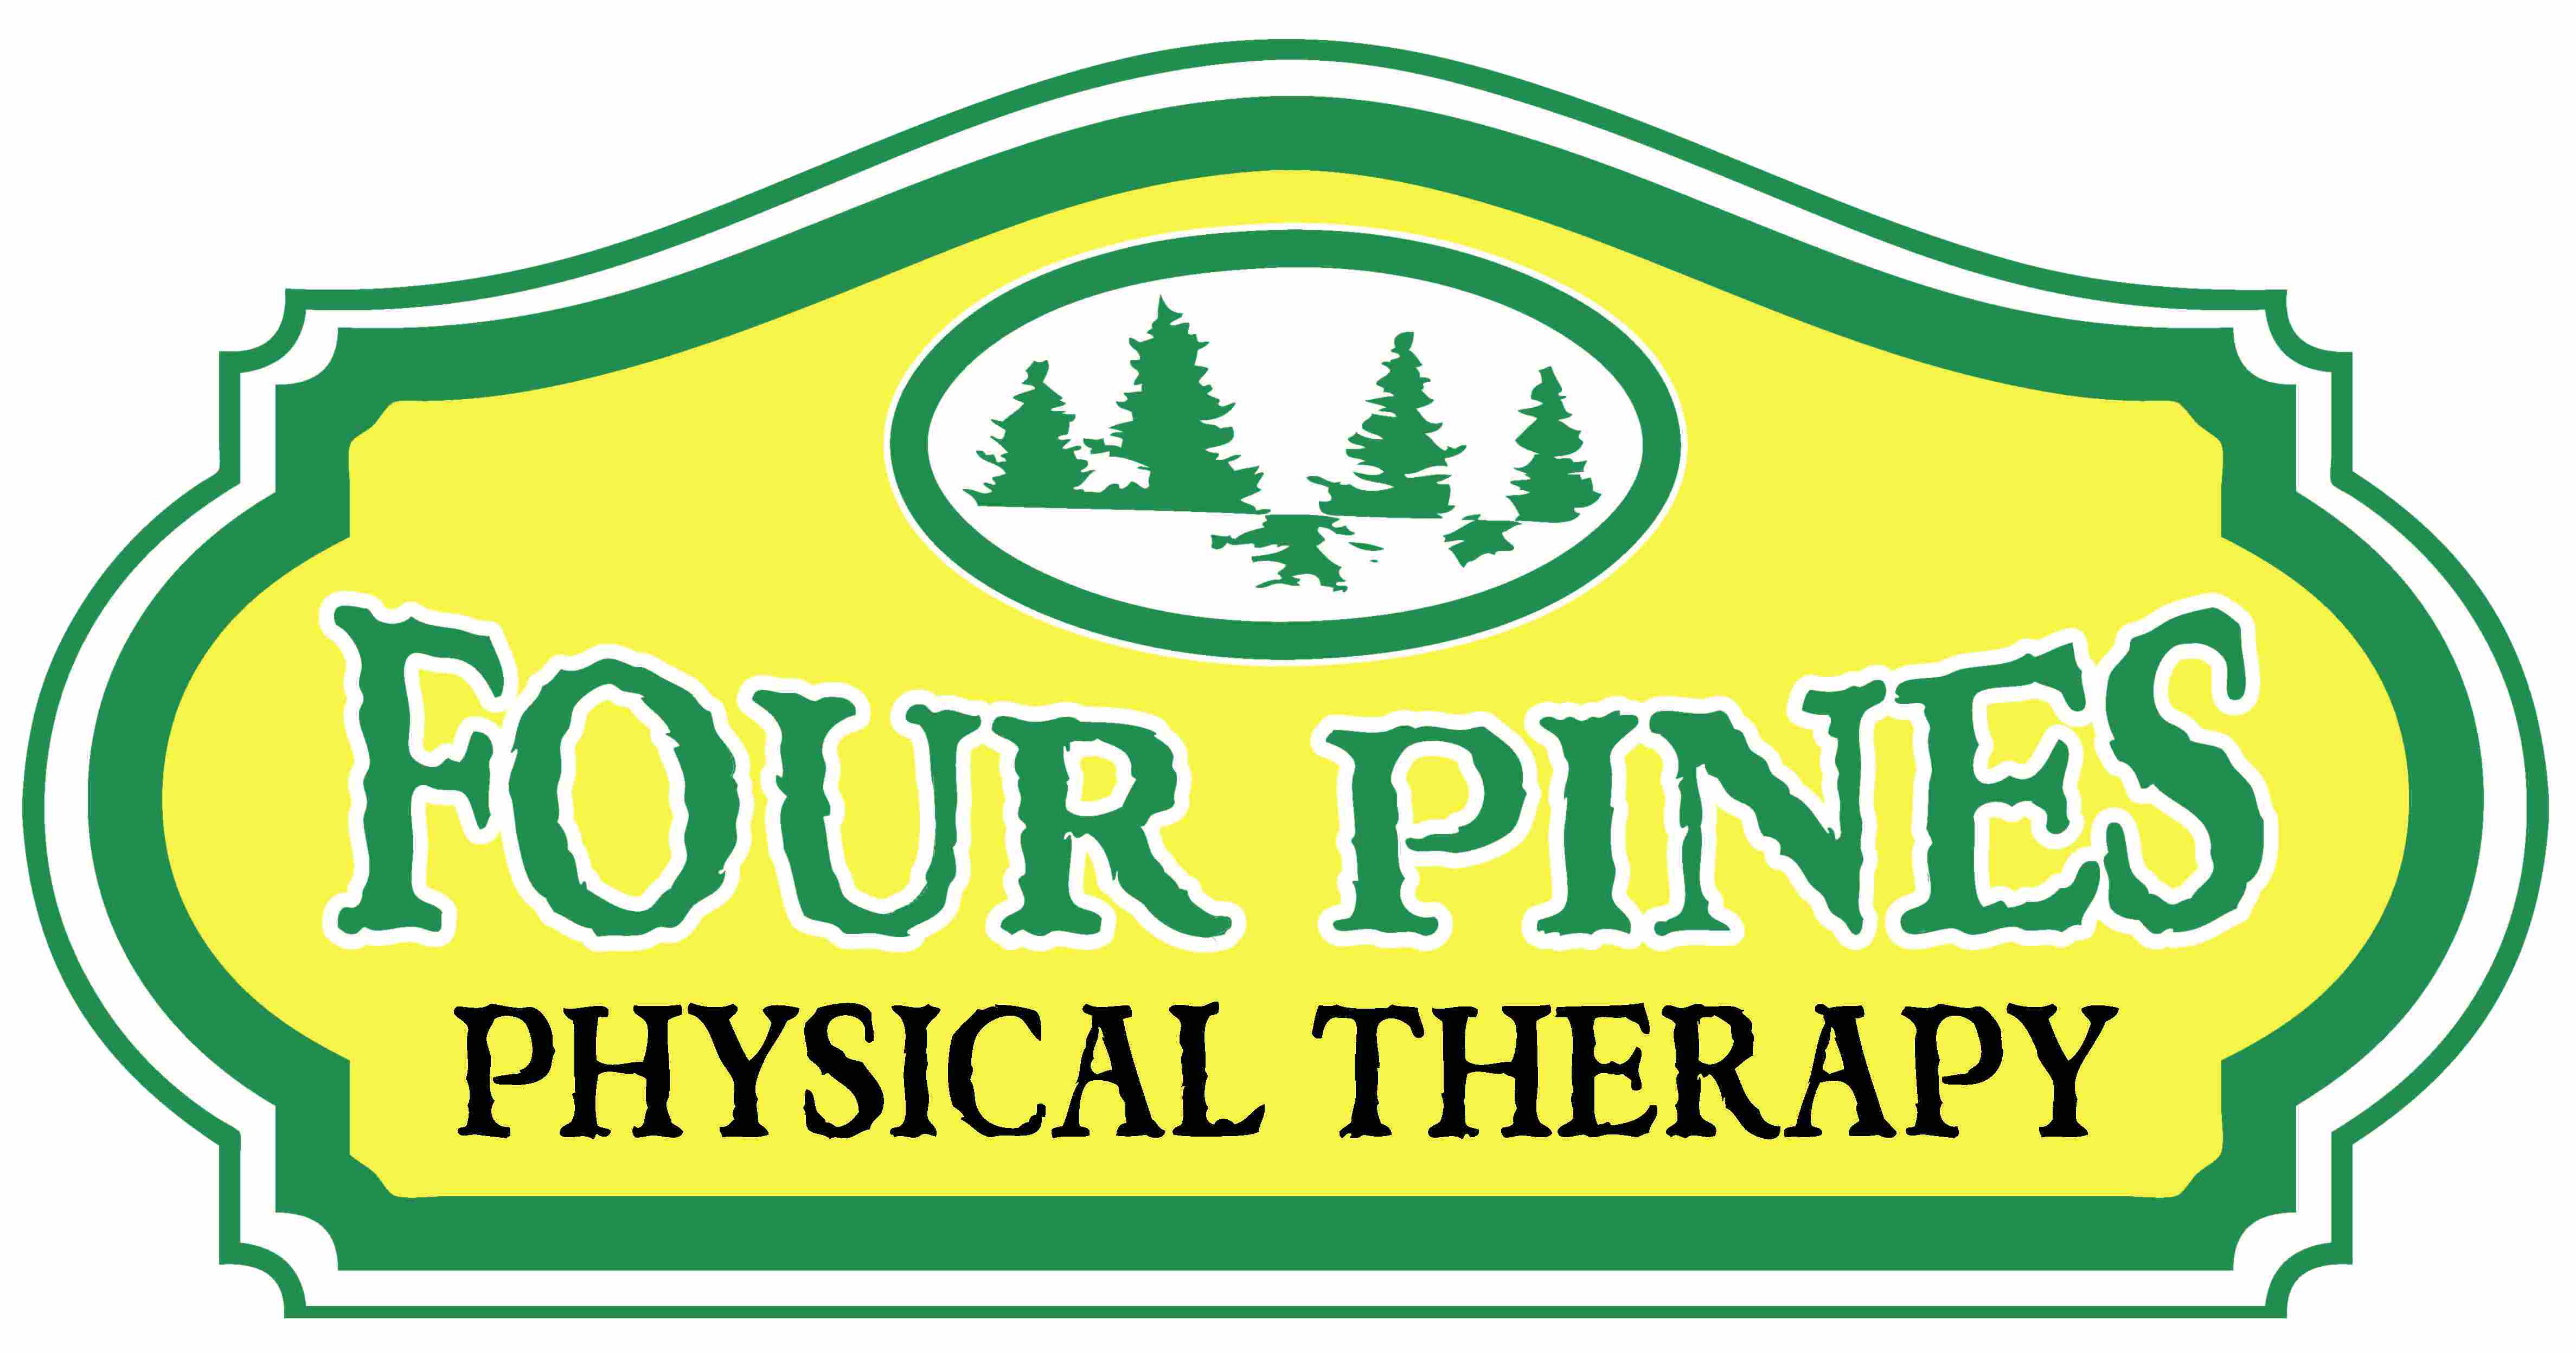 physiotherapy logo